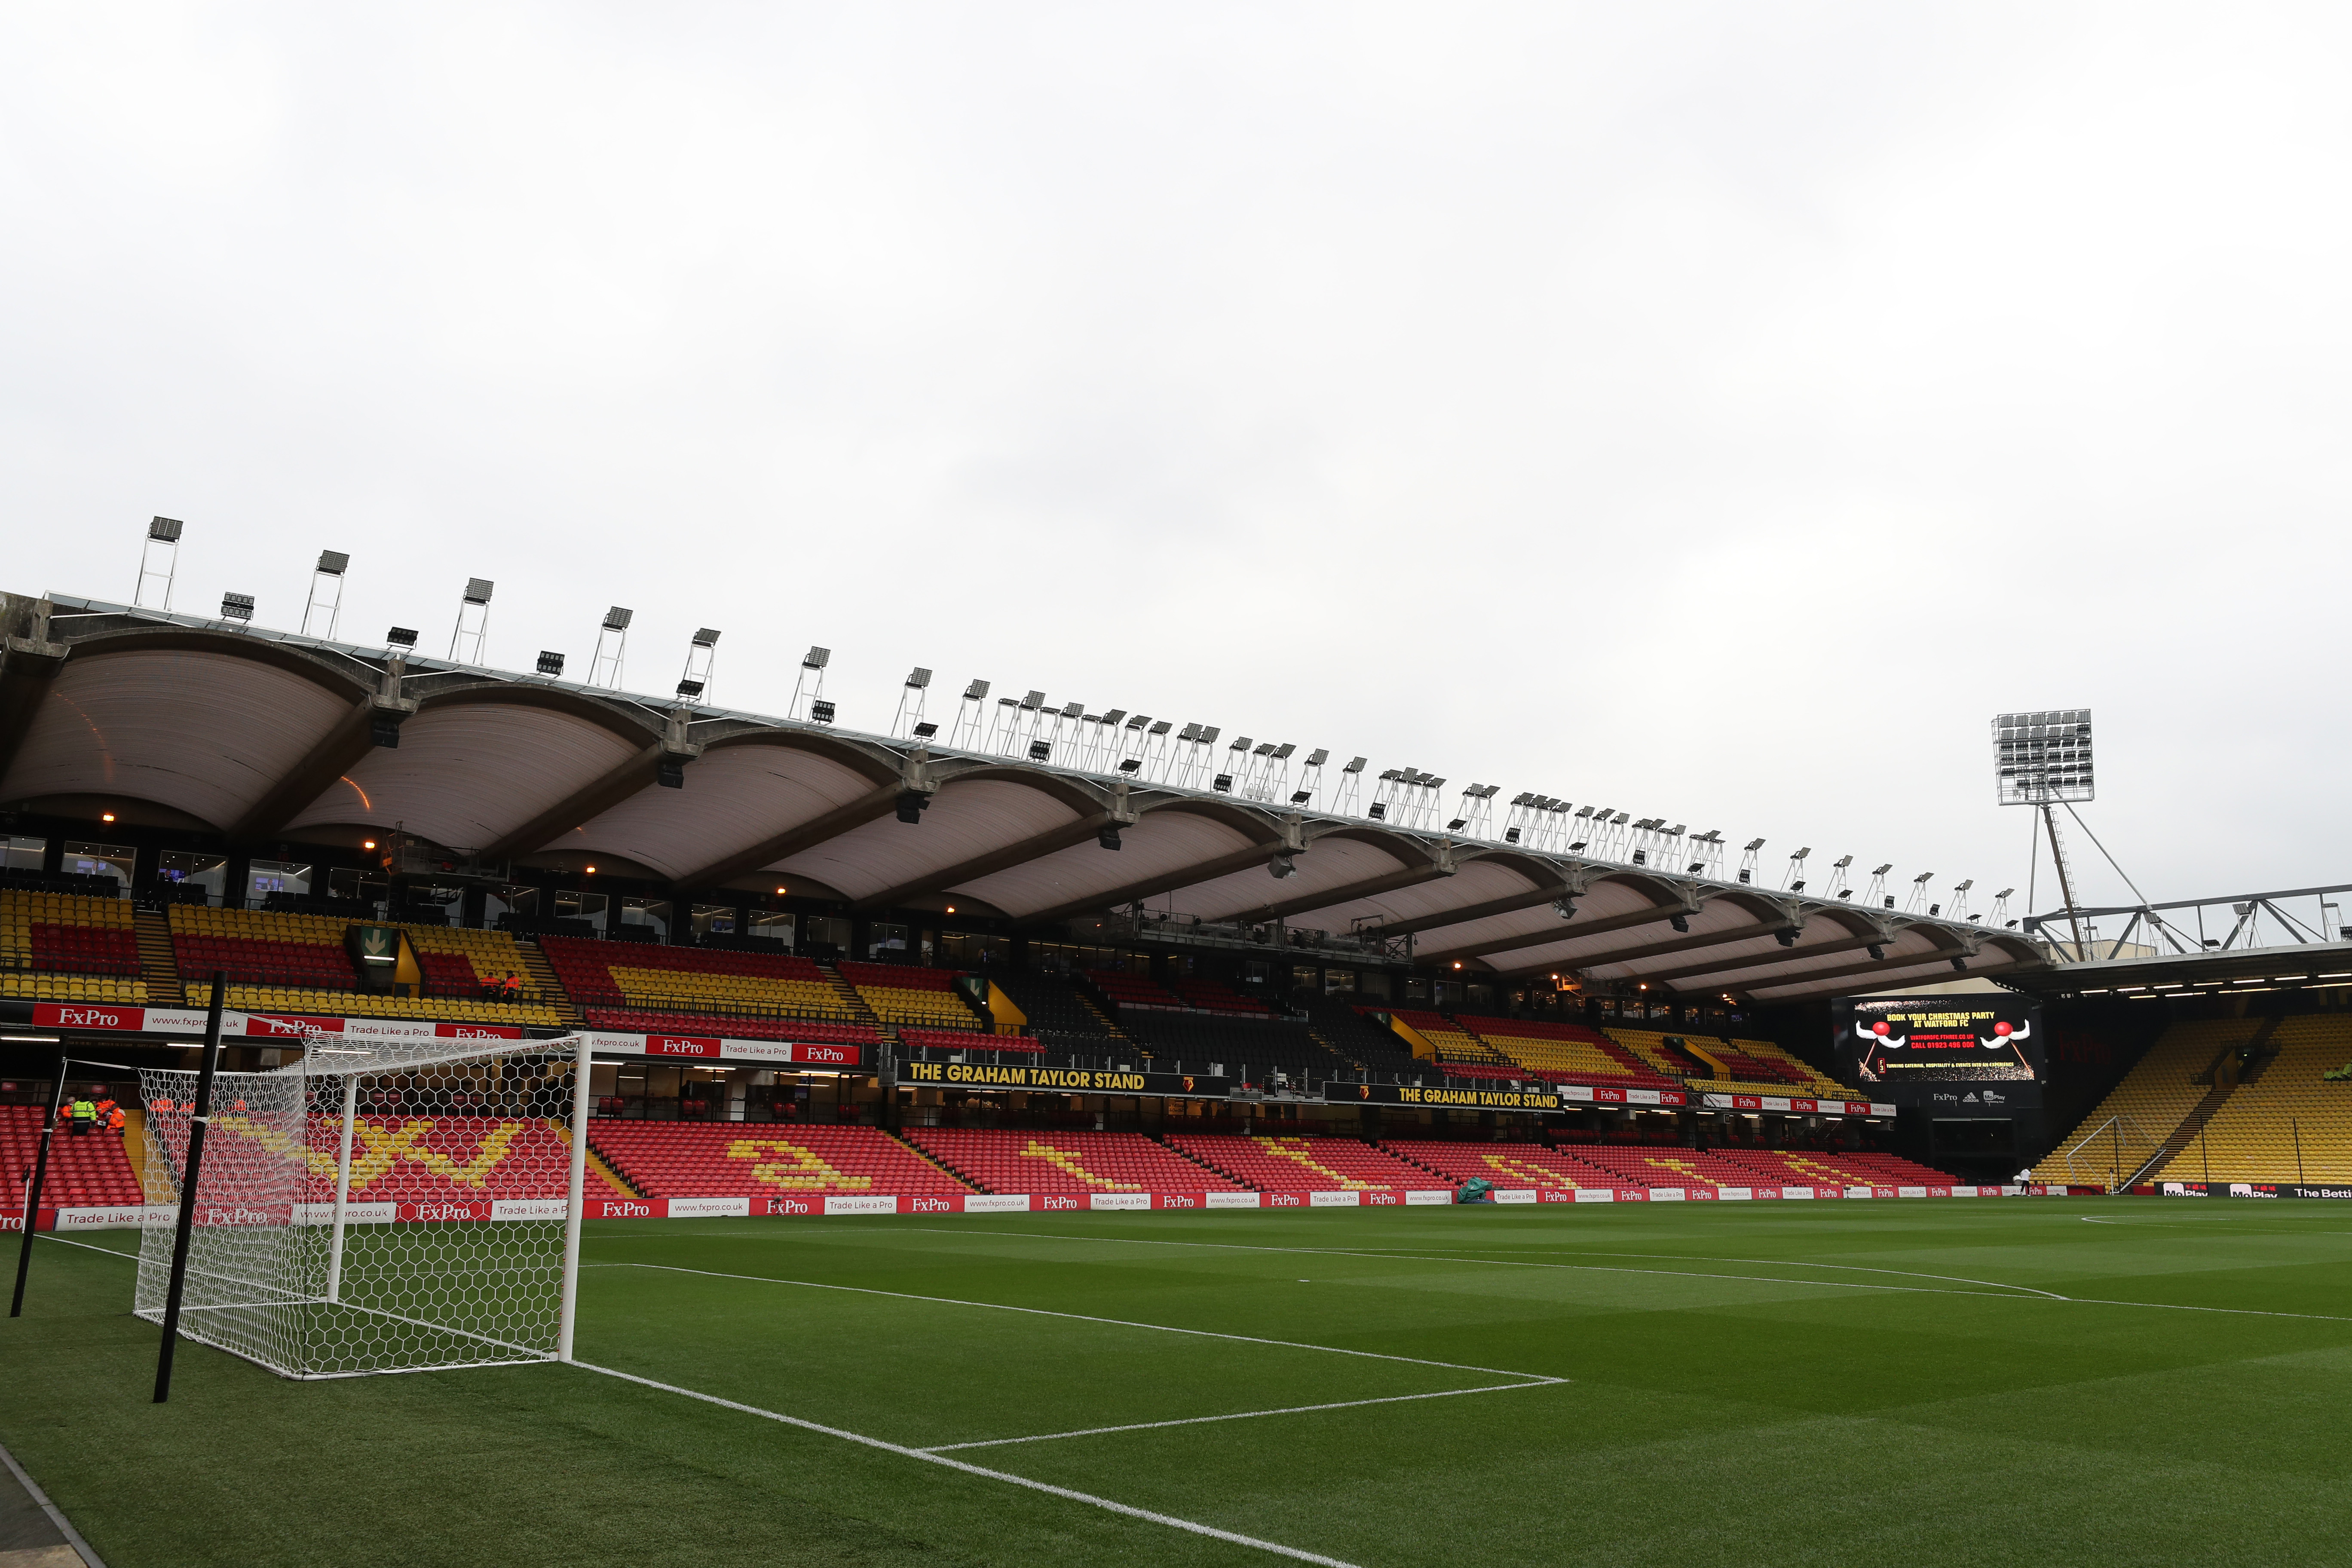 WATFORD, ENGLAND - NOVEMBER 24:  General view inside the stadium prior to the Premier League match between Watford FC and Liverpool FC at Vicarage Road on November 24, 2018 in Watford, United Kingdom.  (Photo by Richard Heathcote/Getty Images)